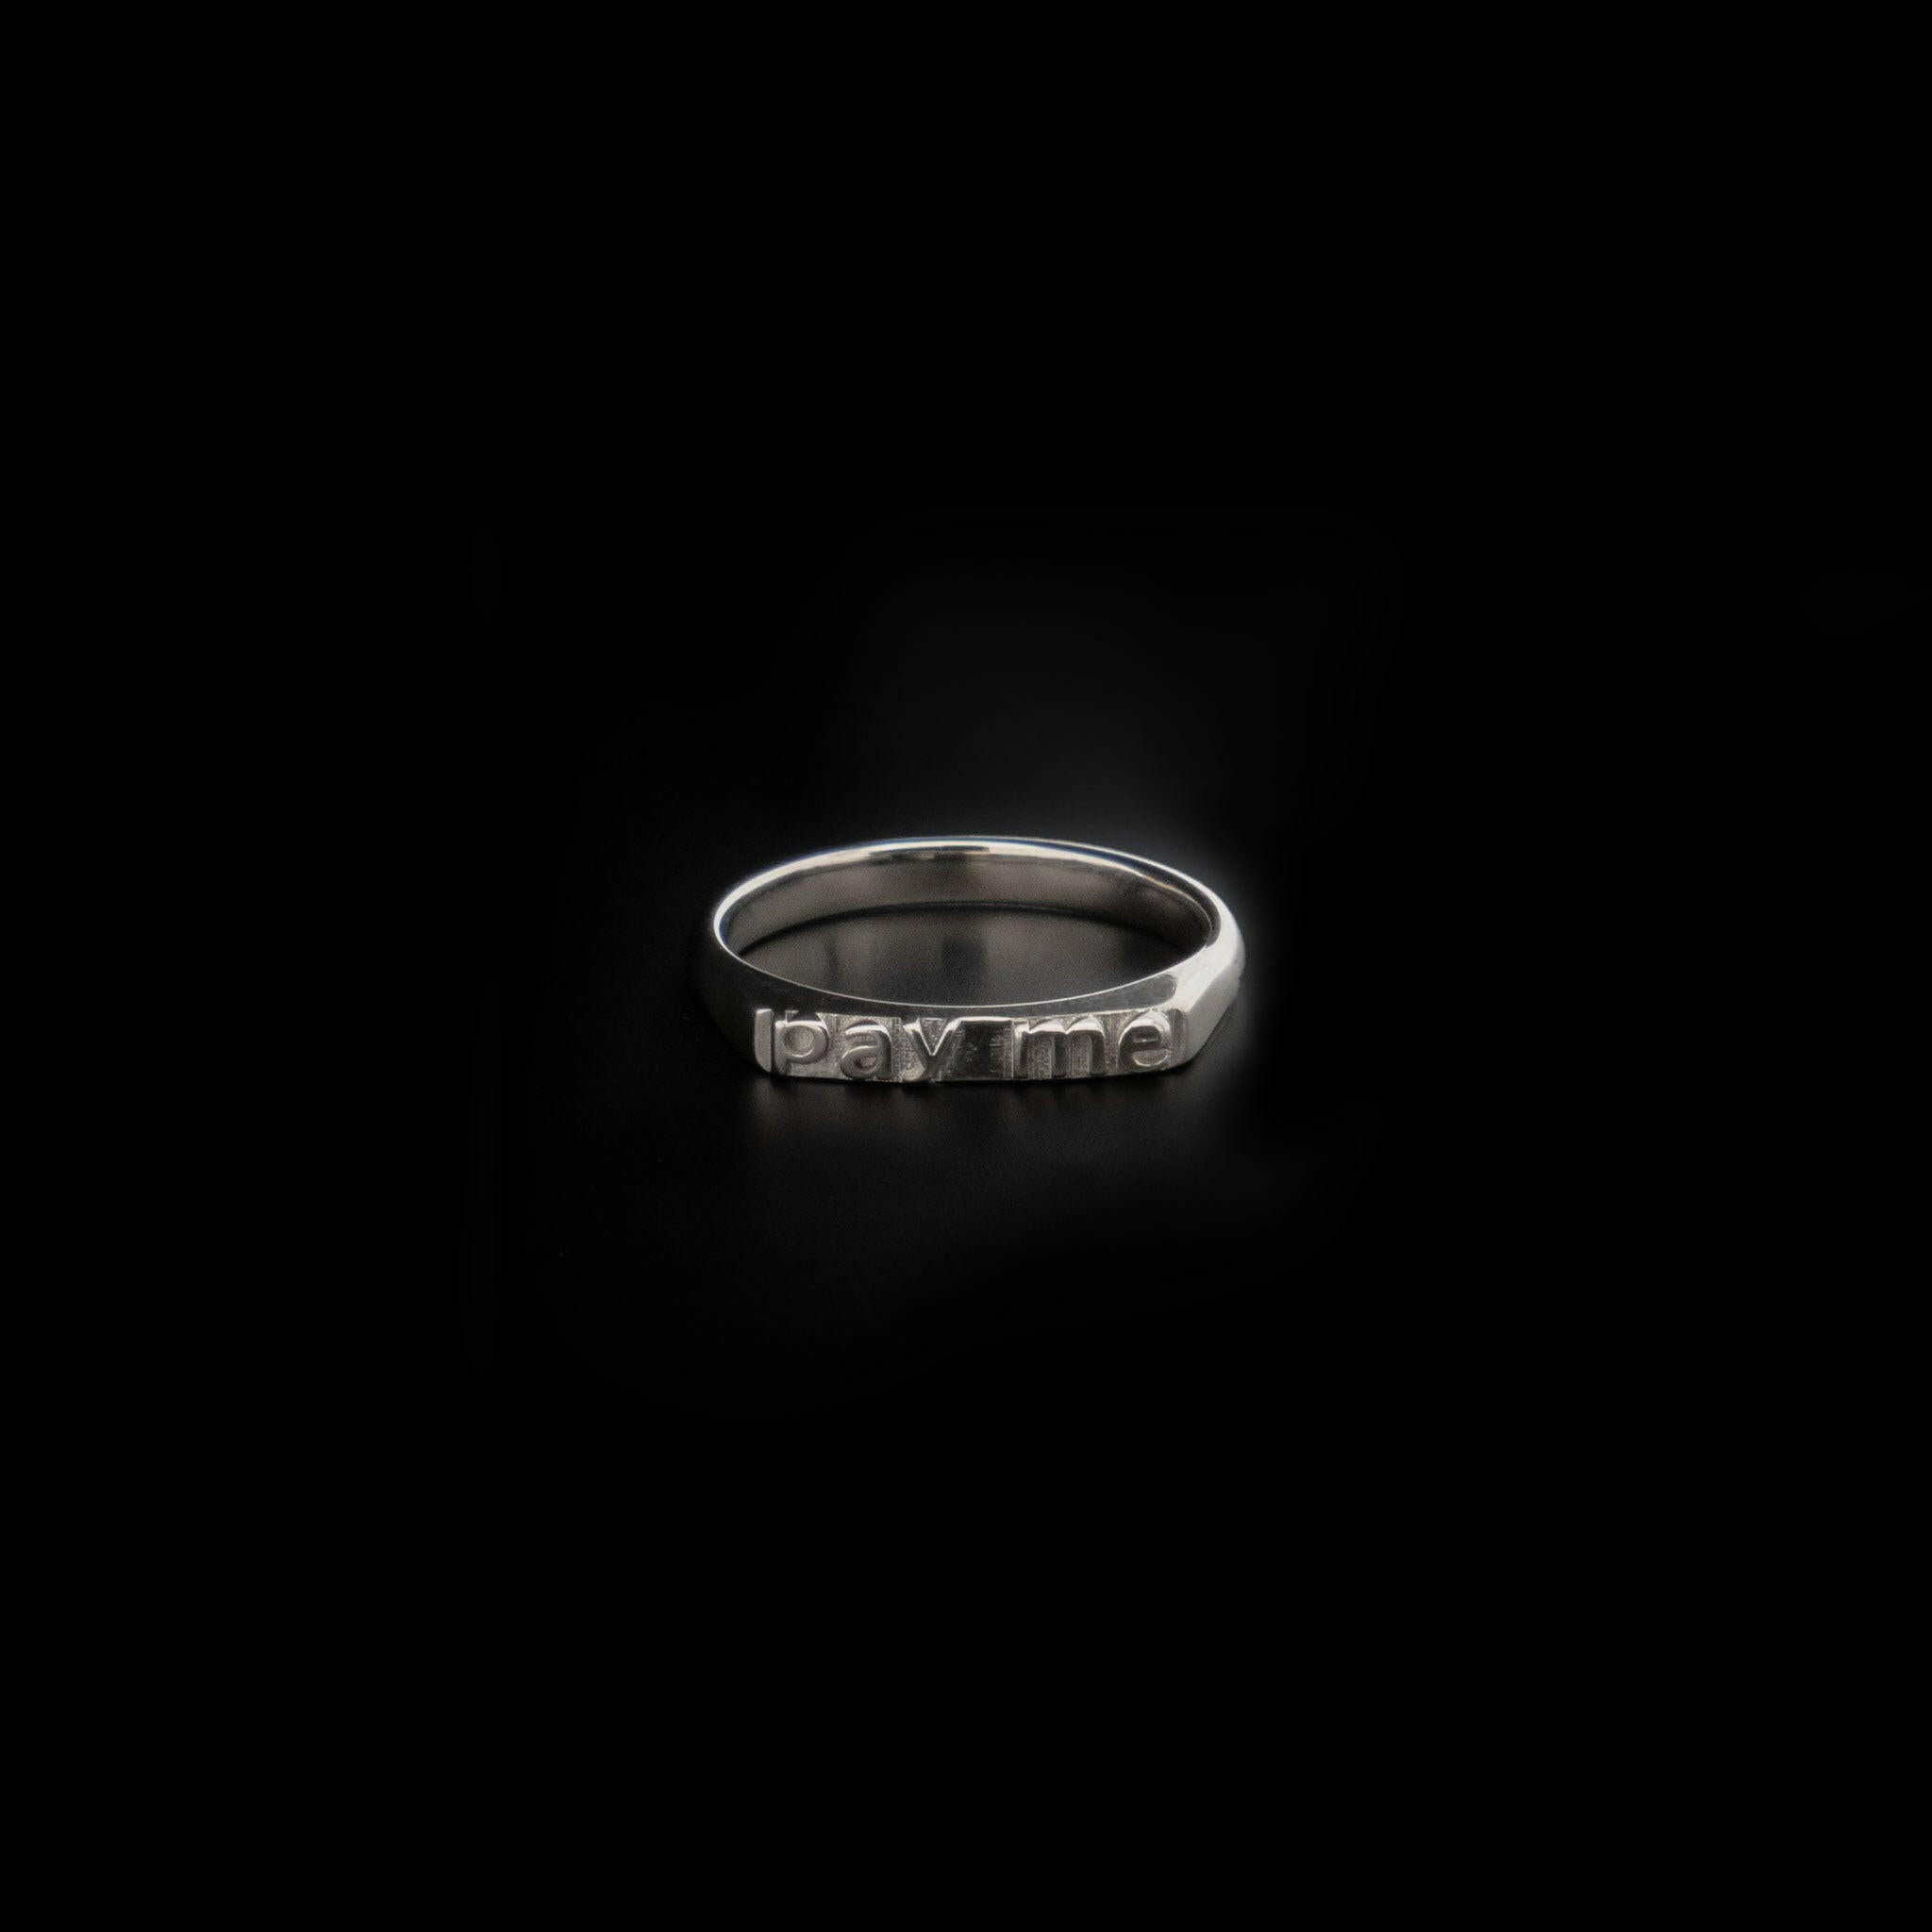 front view of sterling silver ring with text that reads "pay me"